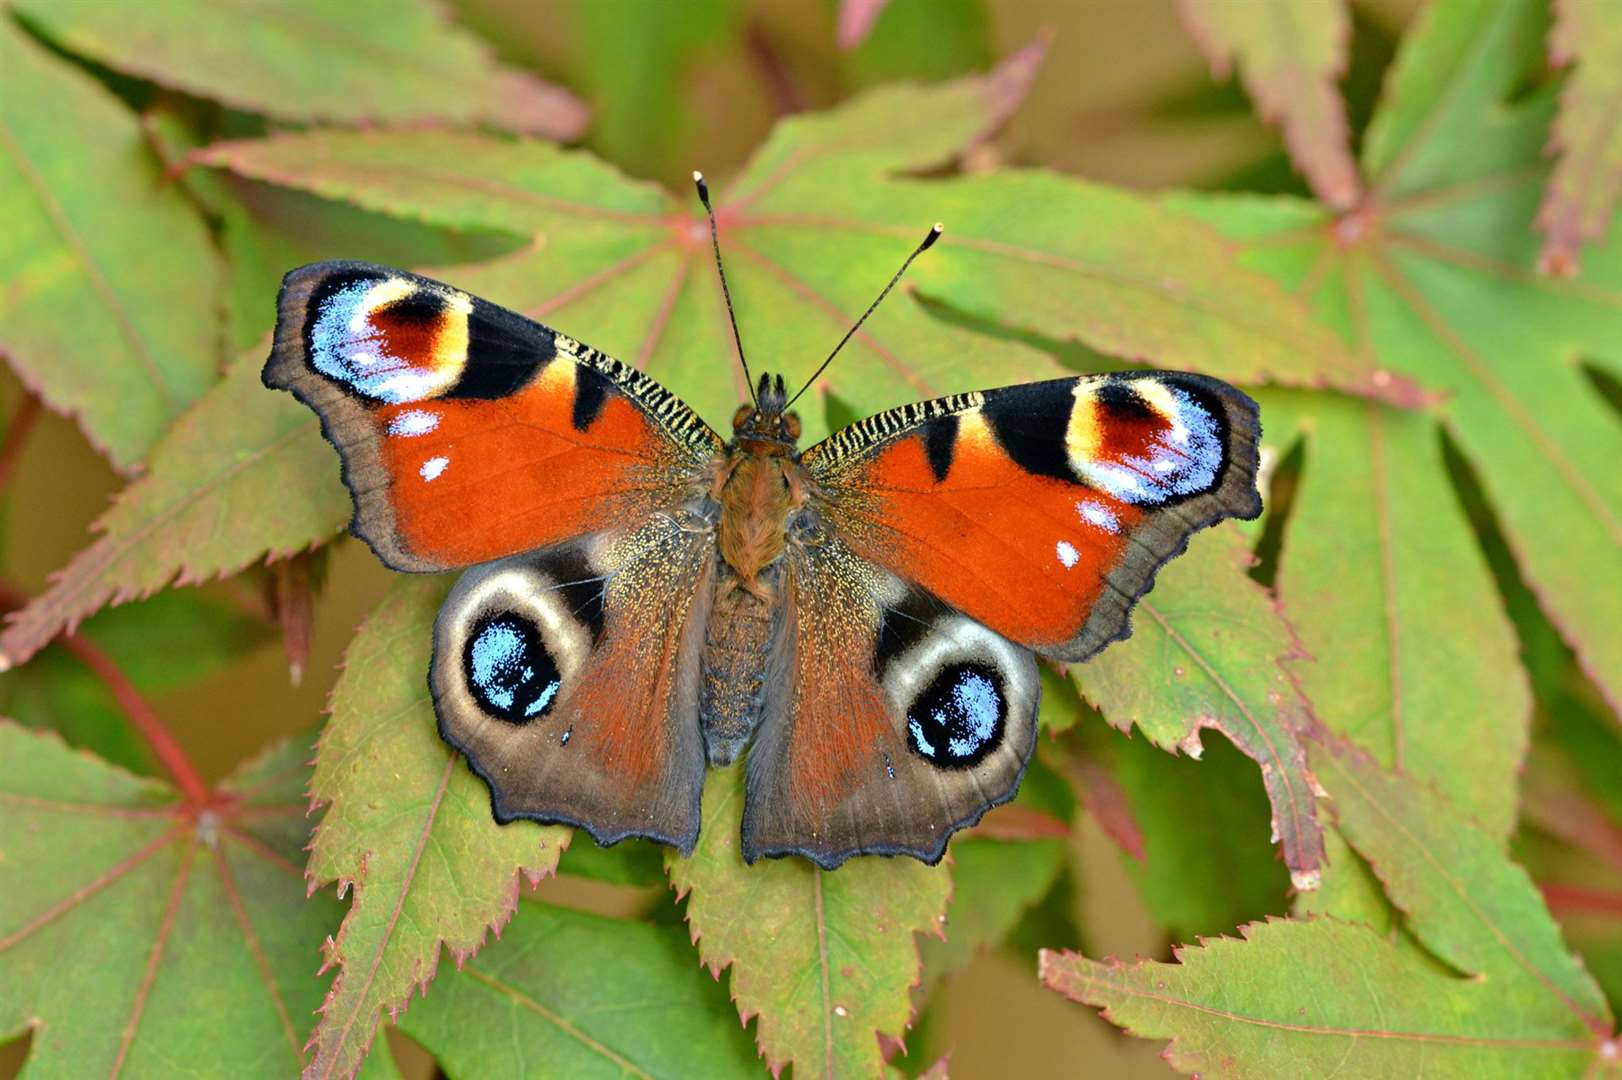 Record numbers signed up last year to count butterflies